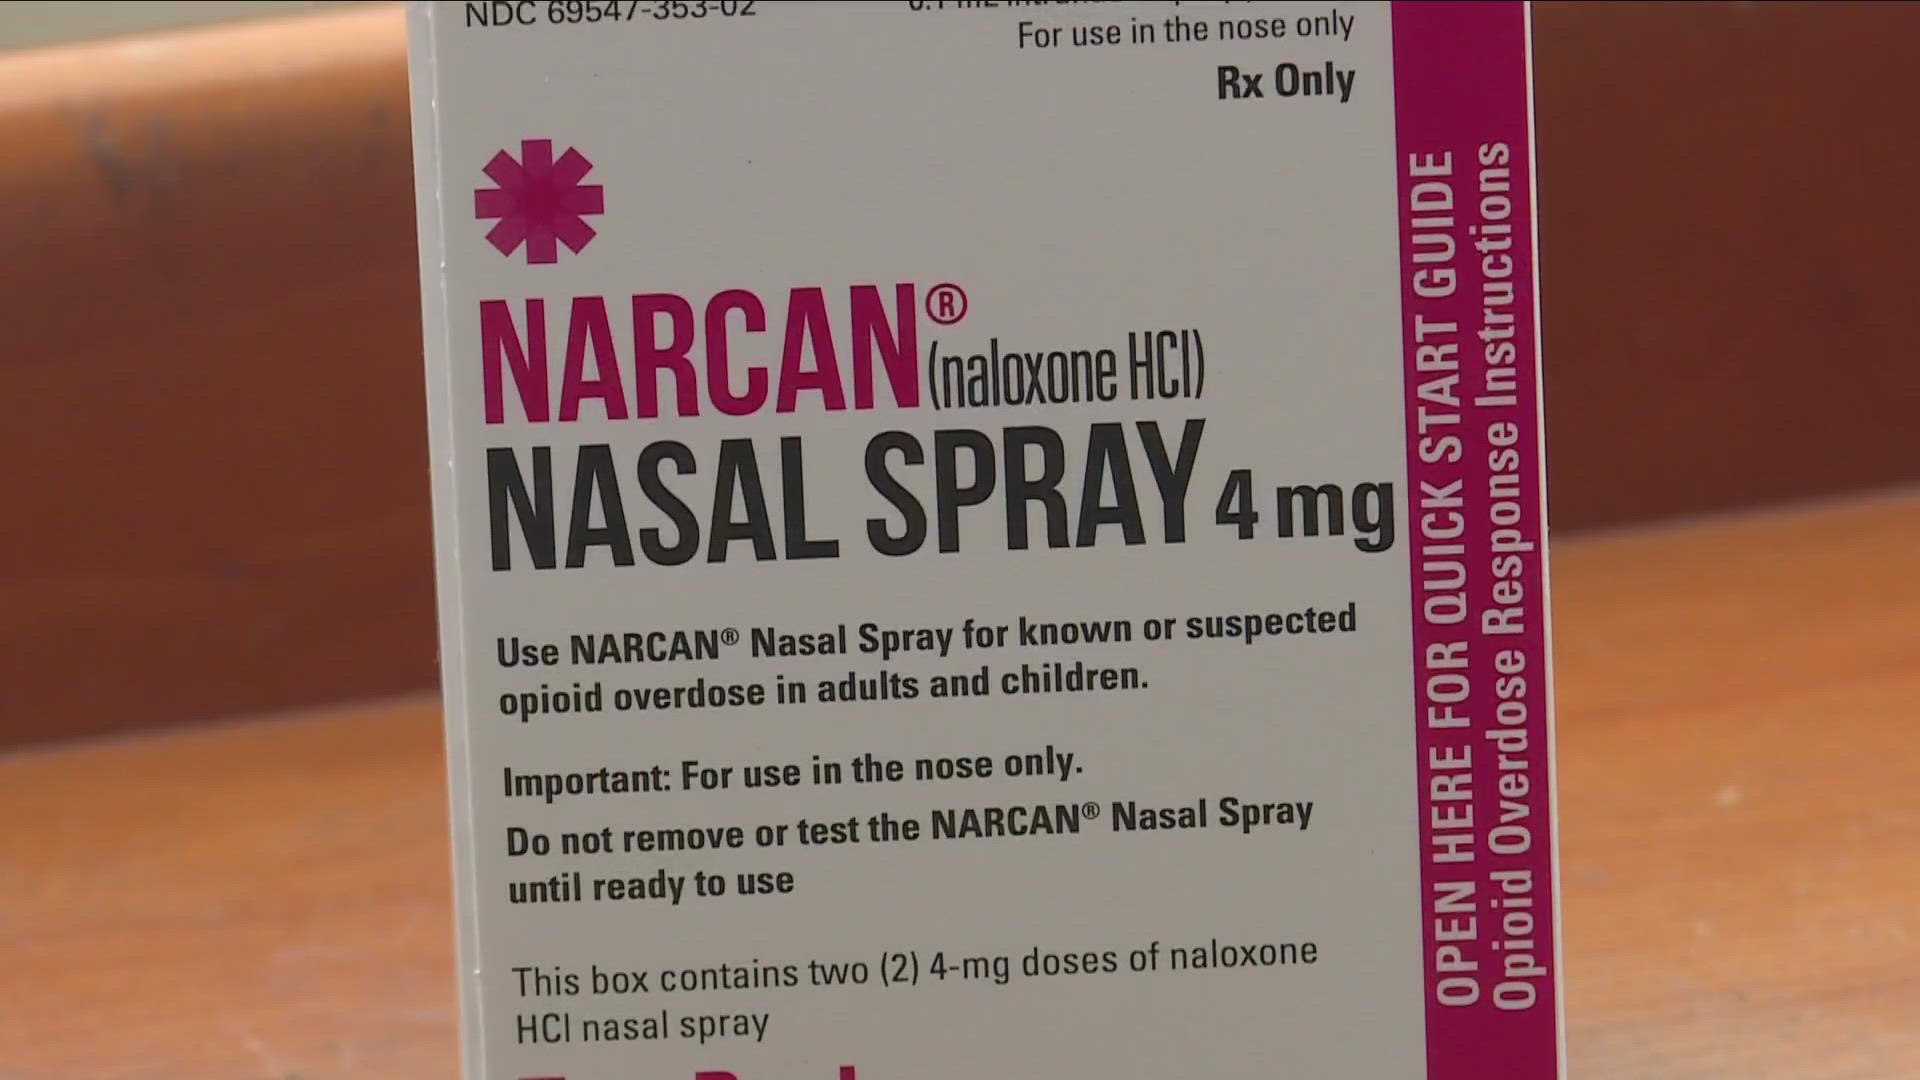 FDA approves over-the-counter sale of Narcan, an opioid overdose antidote